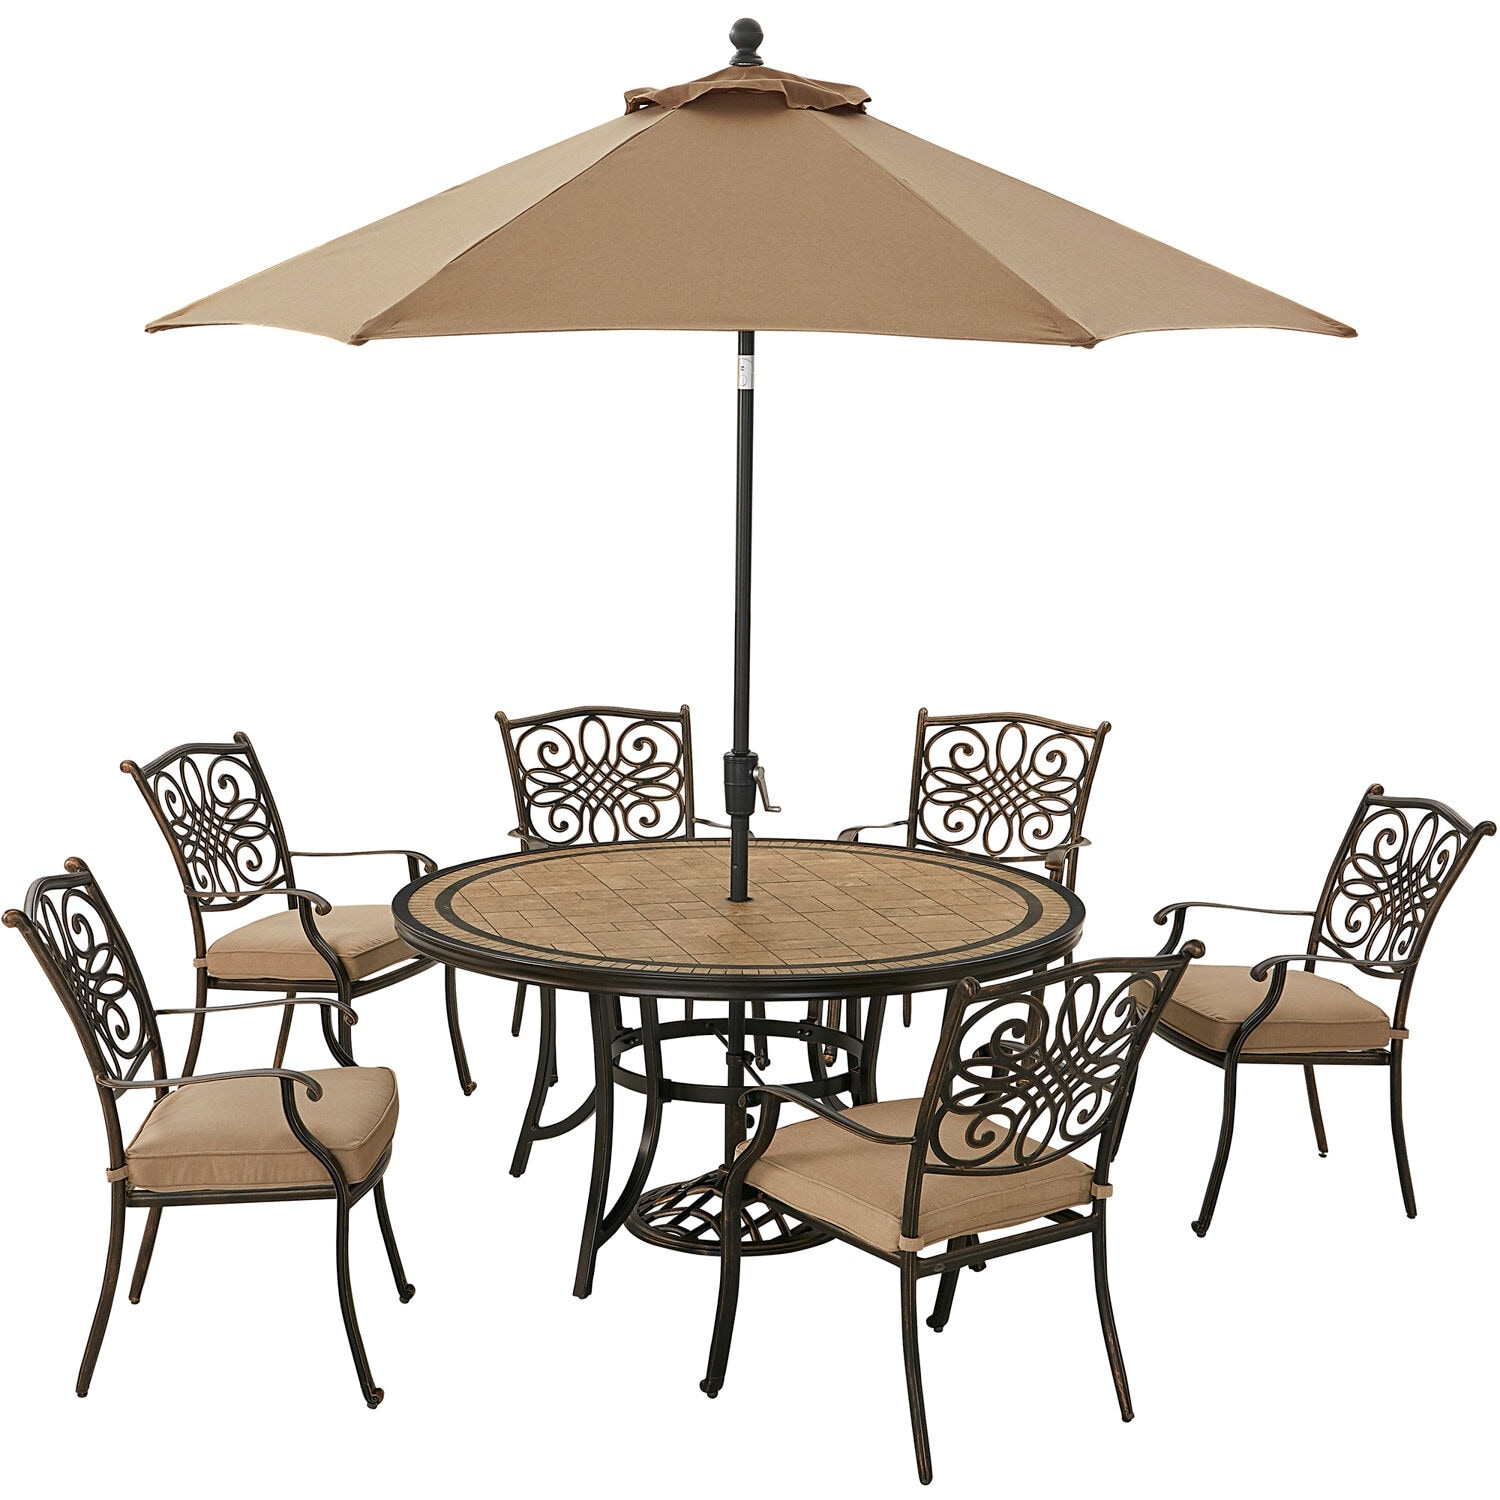 Hanover Monaco 7-piece Dining Set In Tan With Six Dining Chairs  60-in. Tile-top Table And 9-ft. Umbrella